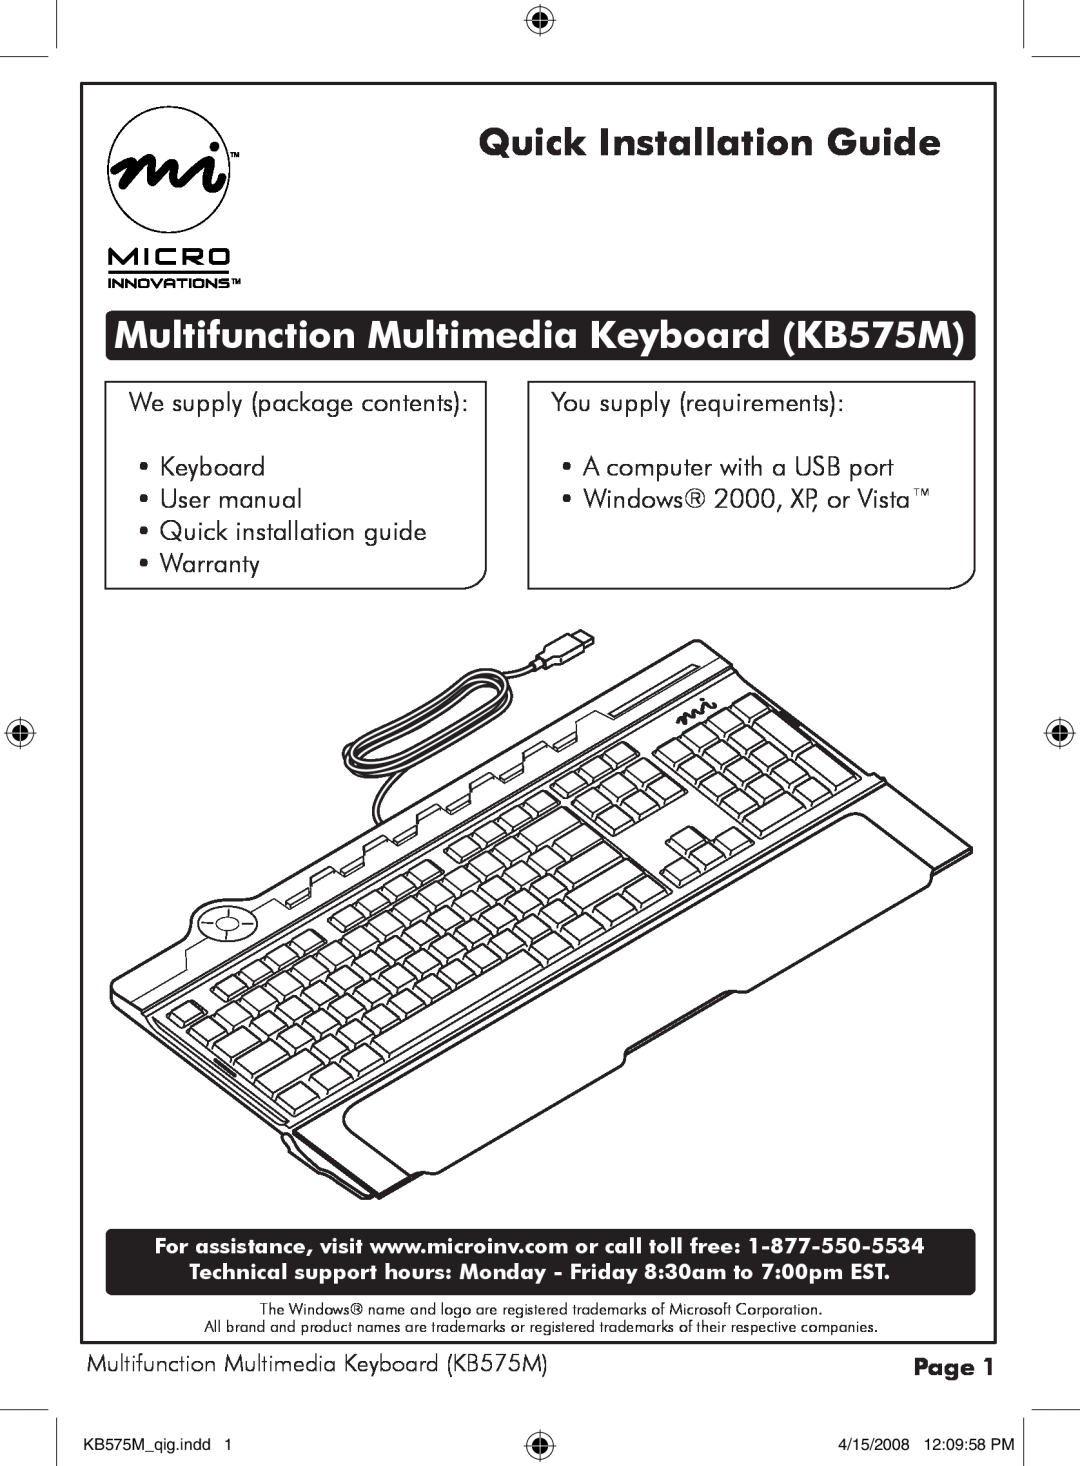 Micro Innovations KB575M user manual Quick Installation Guide, We supply package contents, You supply requirements, Page 